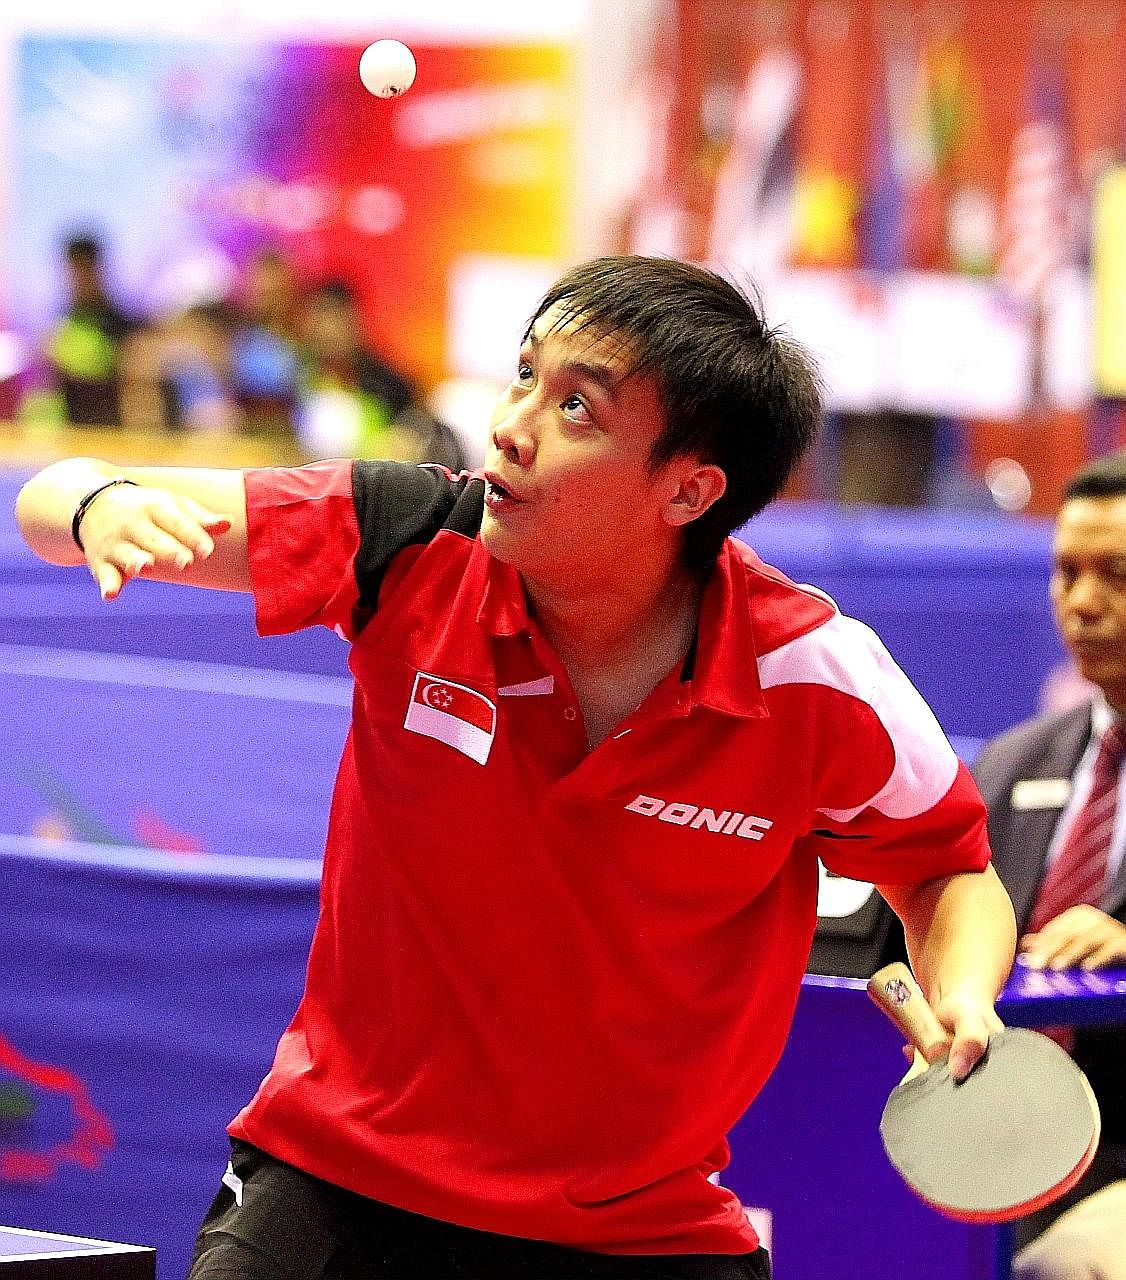 Singapore table tennis player Pang Xuejie hopes to win at least one gold medal and expects India, England and Nigeria to be the Republic's main rivals in the men's team competition.